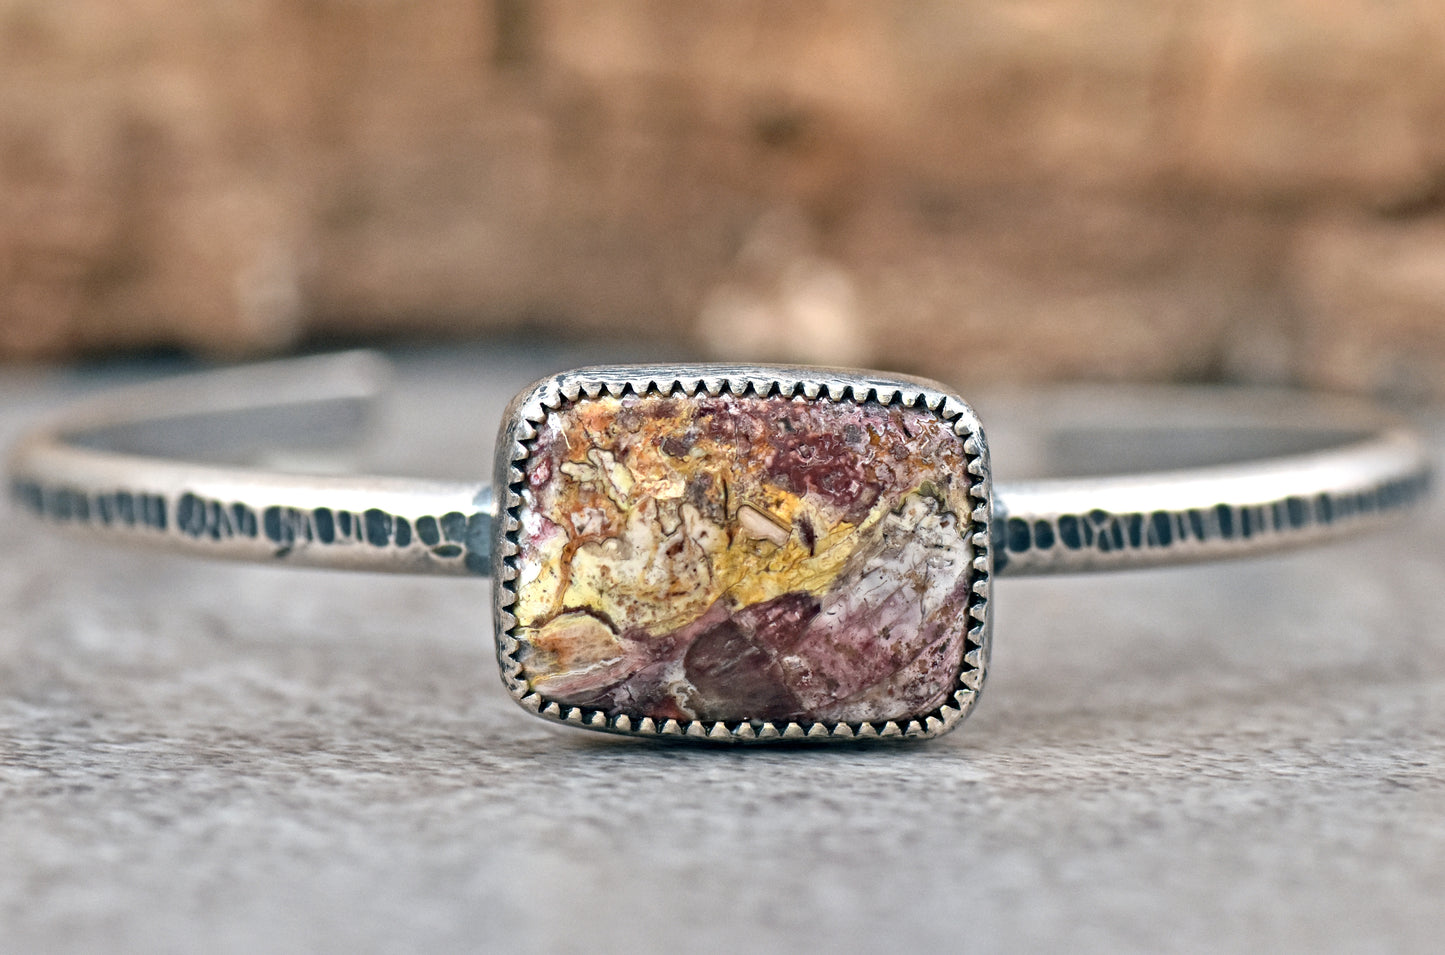 Agate and Sterling Silver Cuff Bracelet, Size Medium, Rustic Artisan Silversmith Jewelry